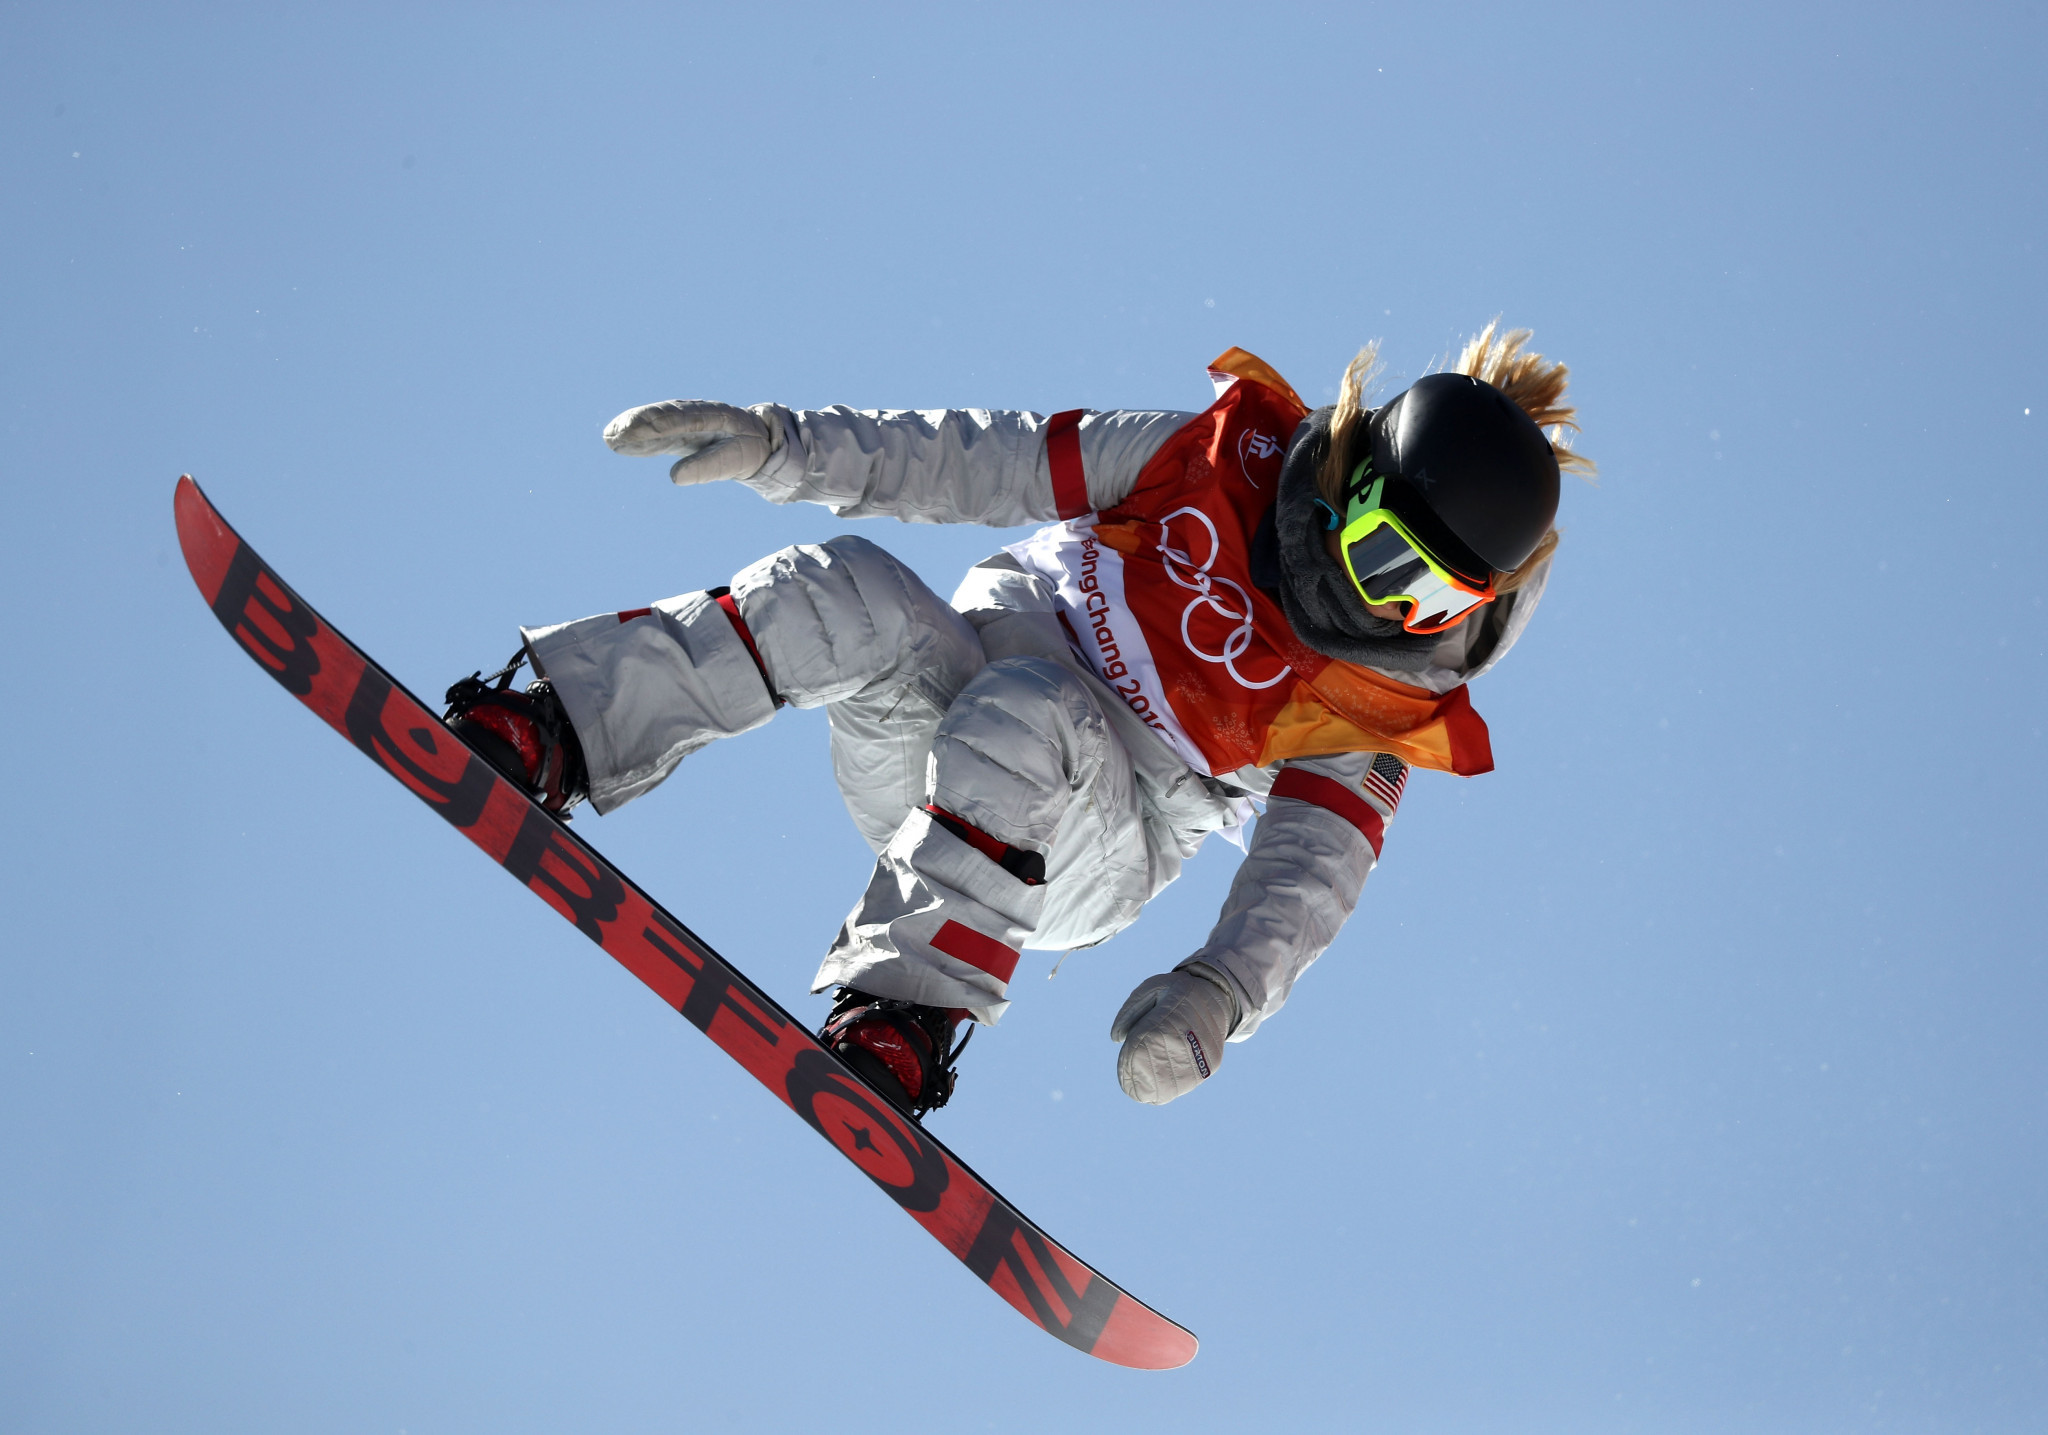 Pyeongchang 2018 Olympic gold medallist Chloe Kim will be aiming to defend her United States Grand Prix title this week ©Getty Images